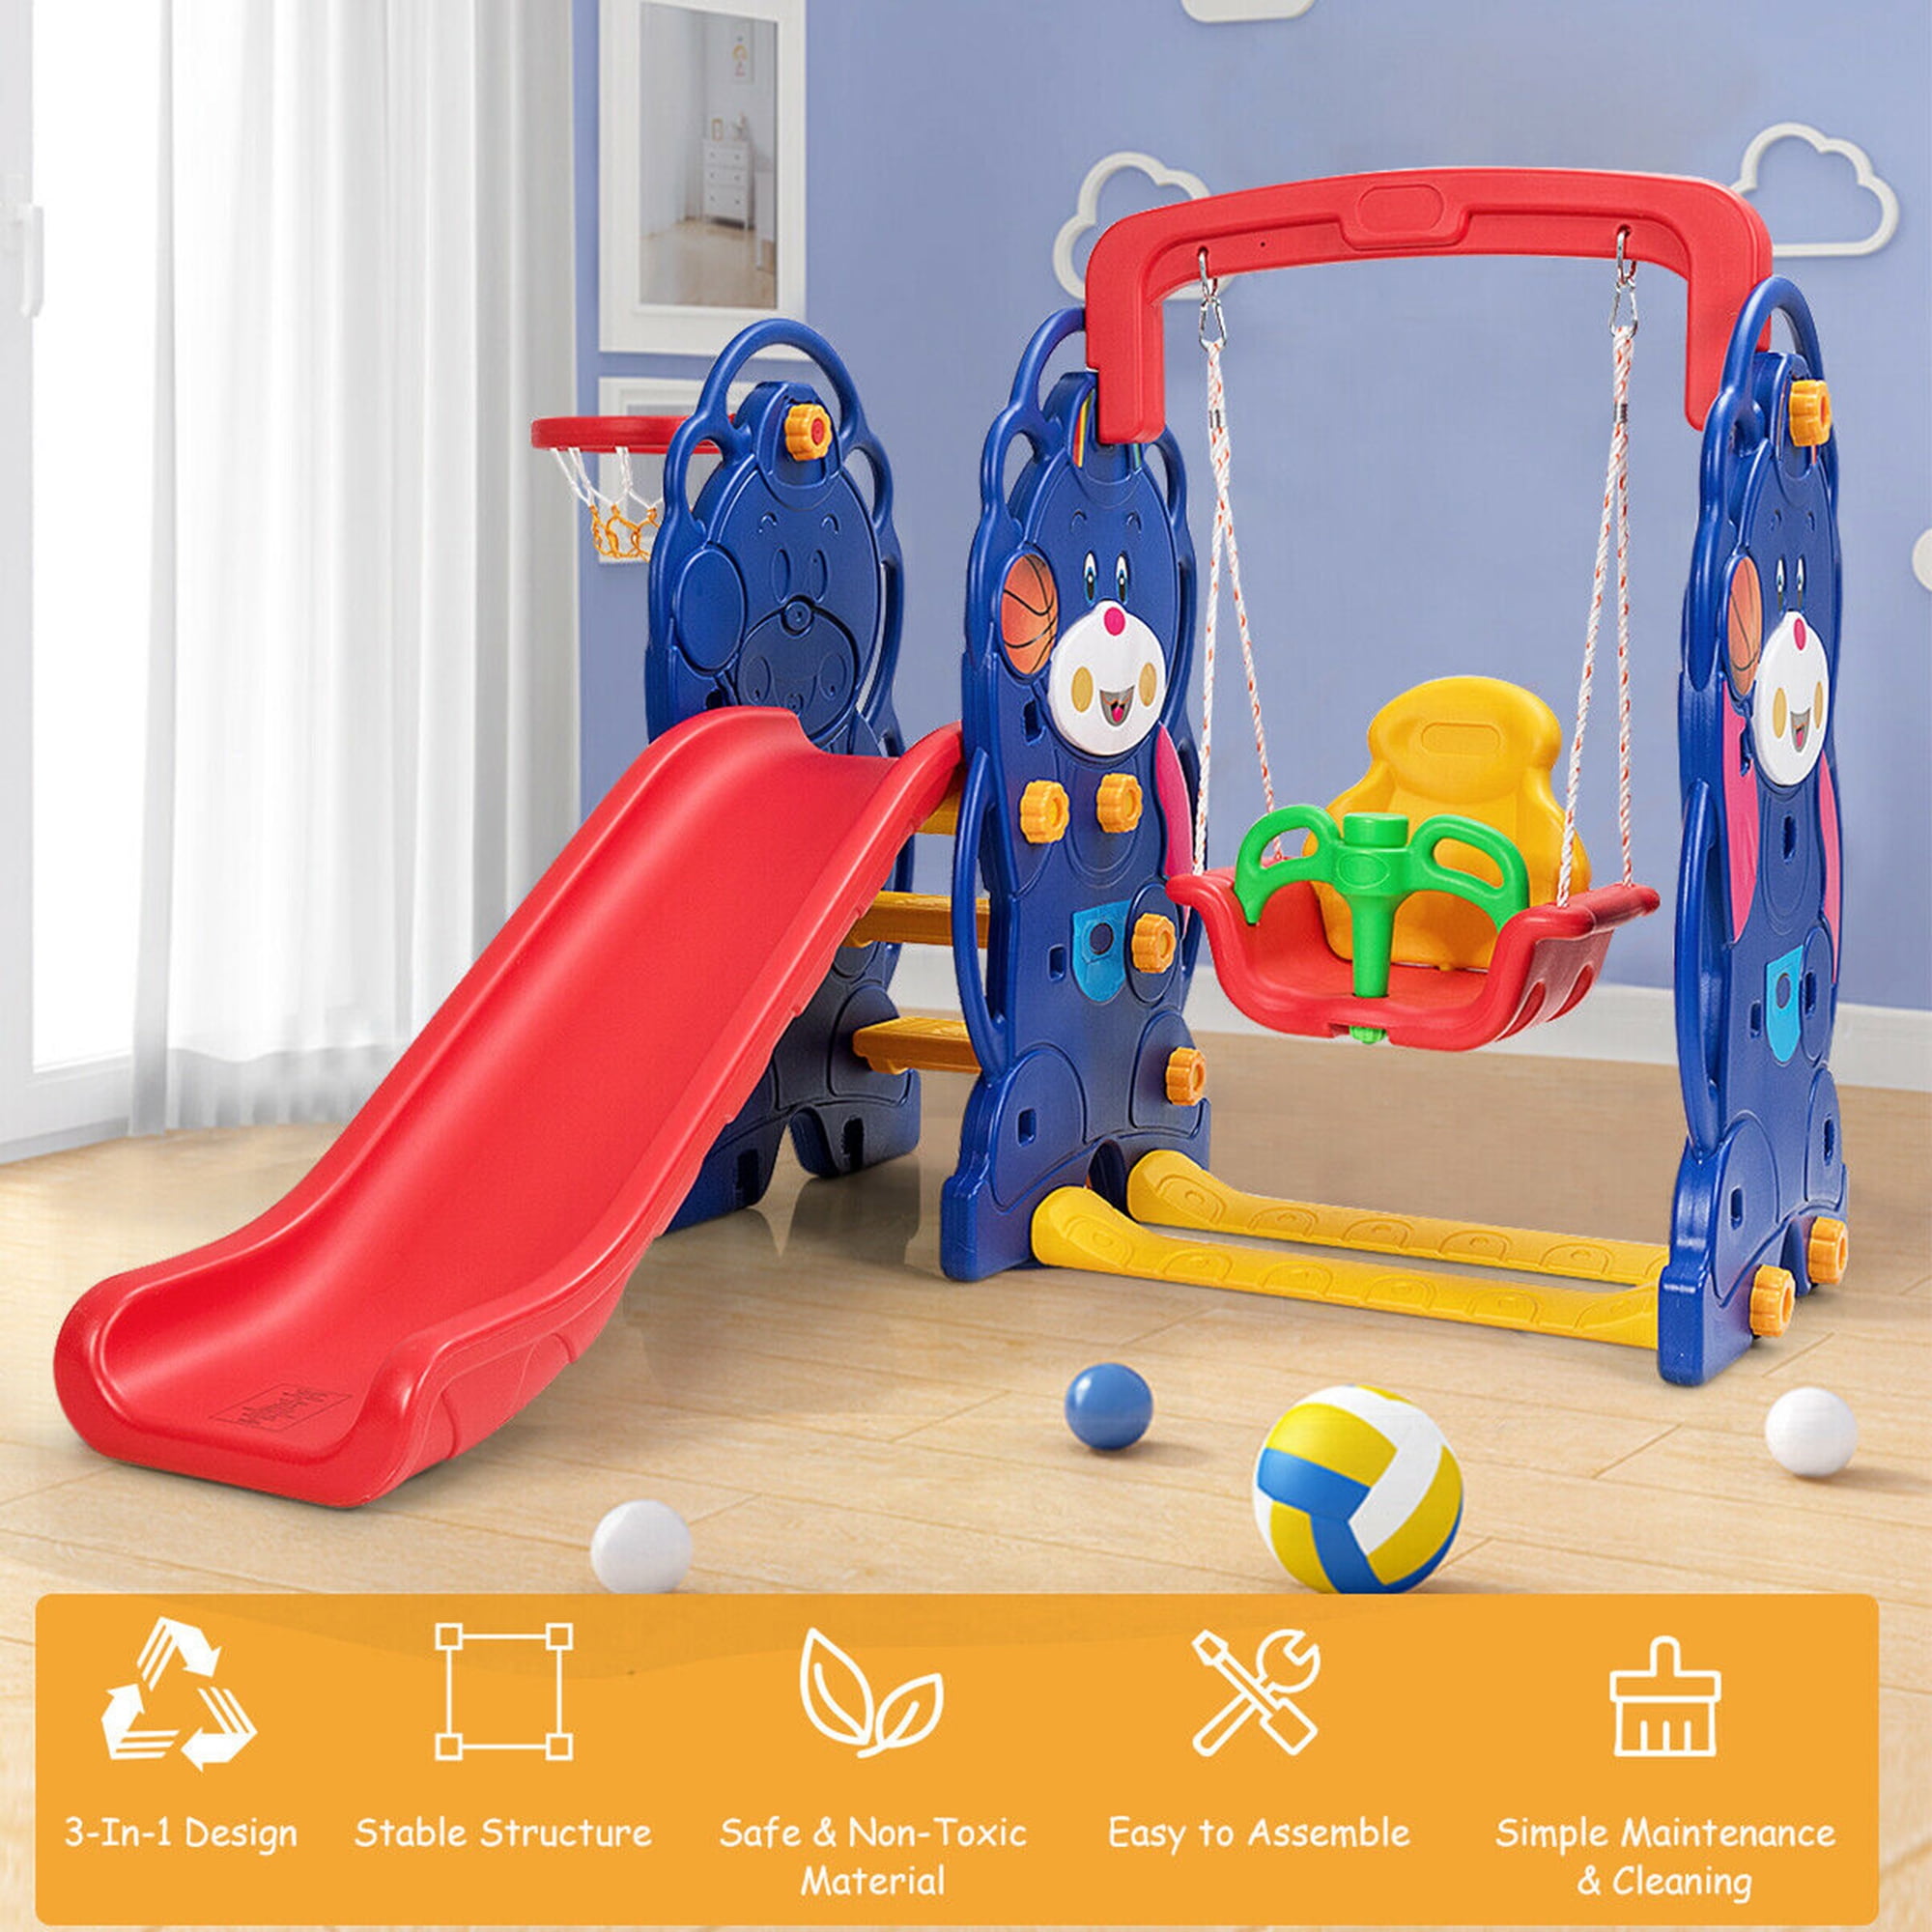 Mosunx 3 in 1 Climber Slide Playset w/Basketball Hoop Swing 1-6 Years Old, Orange Toddler Climber and Swing Set for Both Indoors & Backyard Easy Climb Stairs 